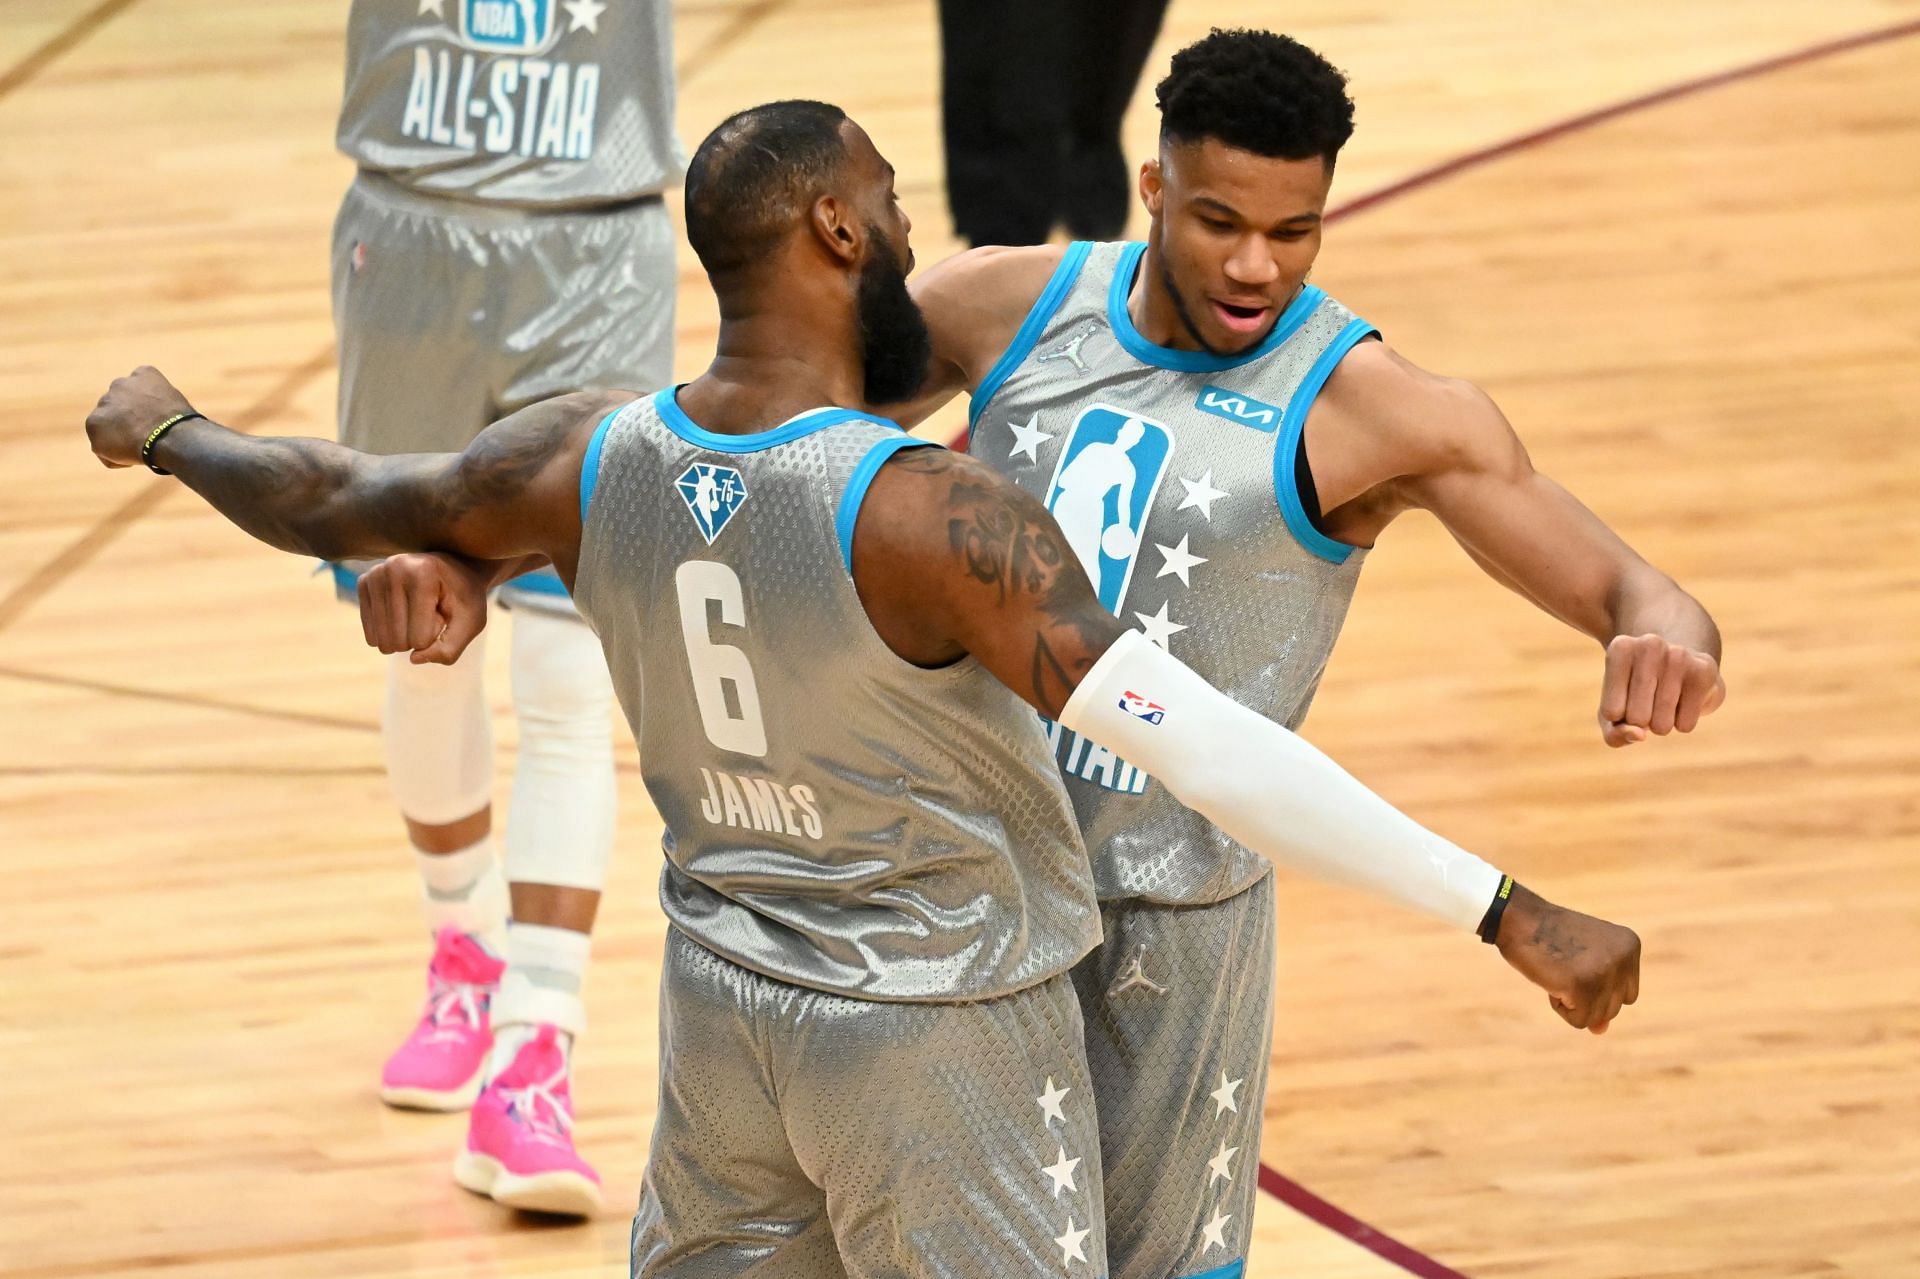 LeBron James (6) and Giannis Antetokounmpo of Team LeBron celebrate after defeating Team Durant 163-160 in the All-Star Game.